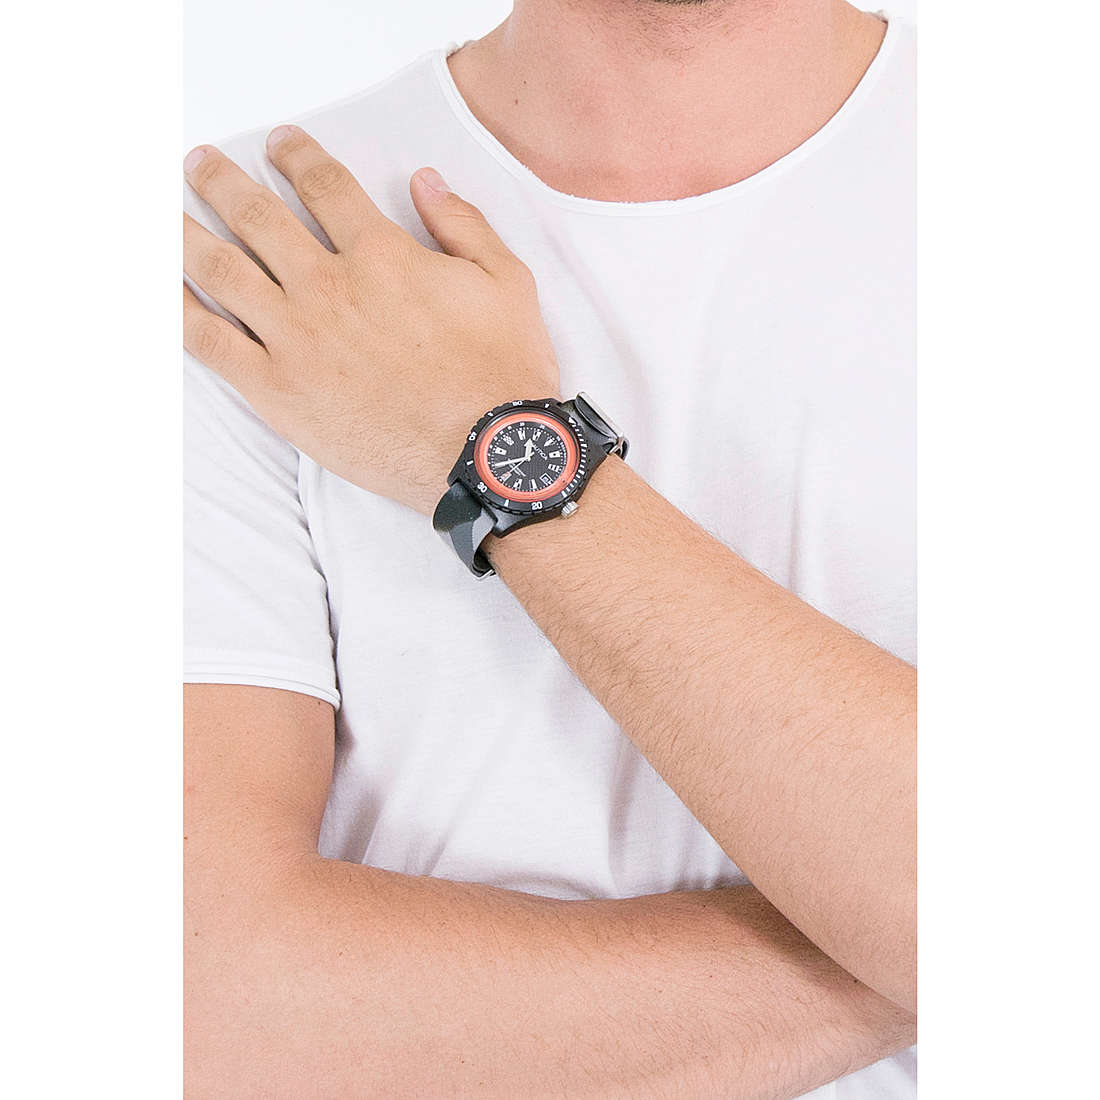 Nautica only time Surfside man NAPSRF005 wearing